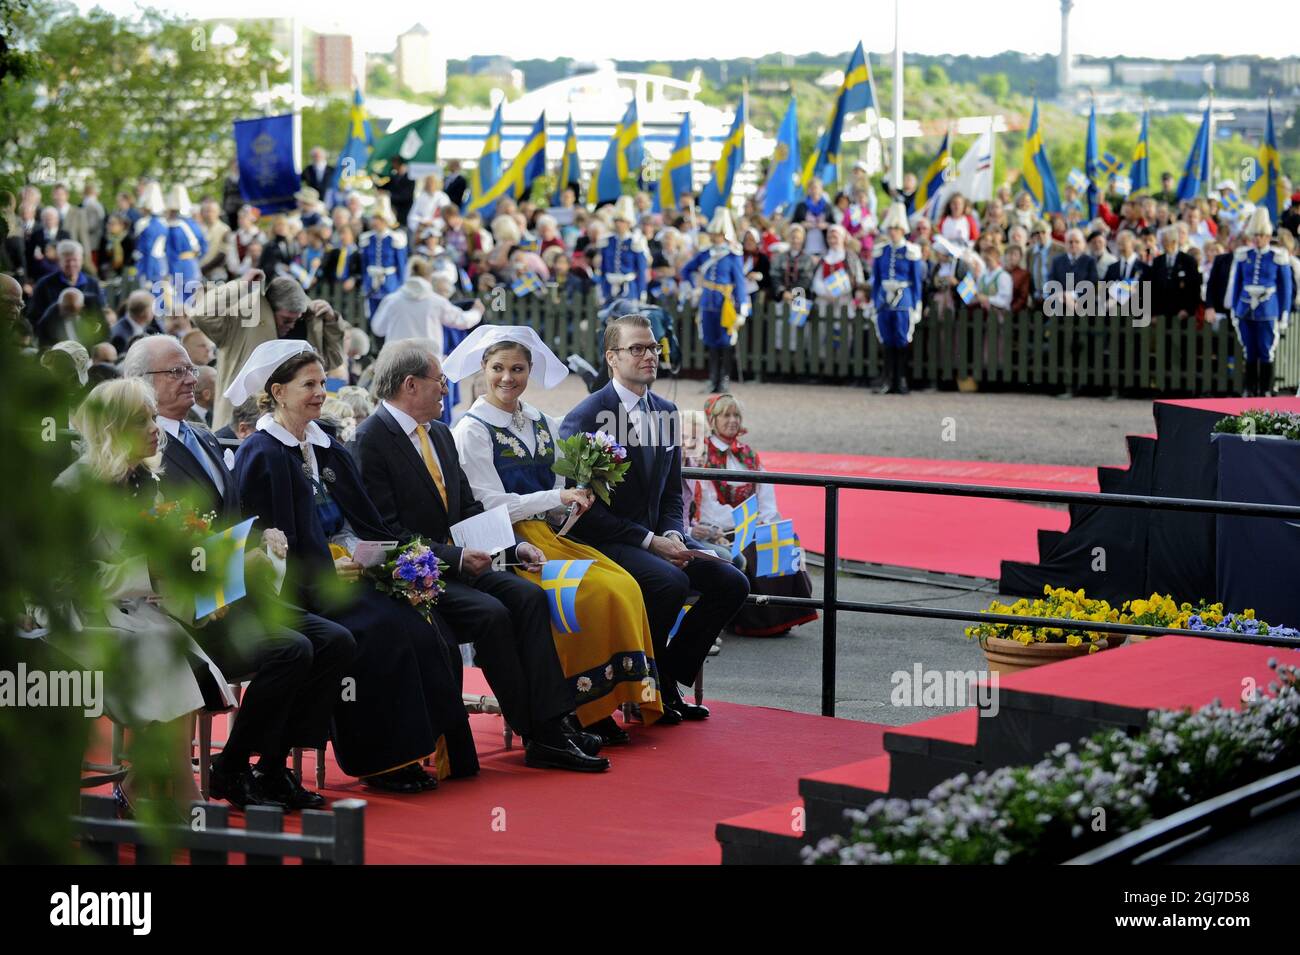 STOCKHOLM 20120606 (L-R) Swedish King Carl XVI Gustaf, Queen Silvia, Speaker of Parliament Per Westerberg, Crown Princess Victoria and Prince Daniel attend the celebration of the Swedish national day at Skansen Museum in Stockholm, Sweden, June 6, 2012. Photo: Jessica Gow / SCANPIX SWEDEN / Code 10070                     Stock Photo